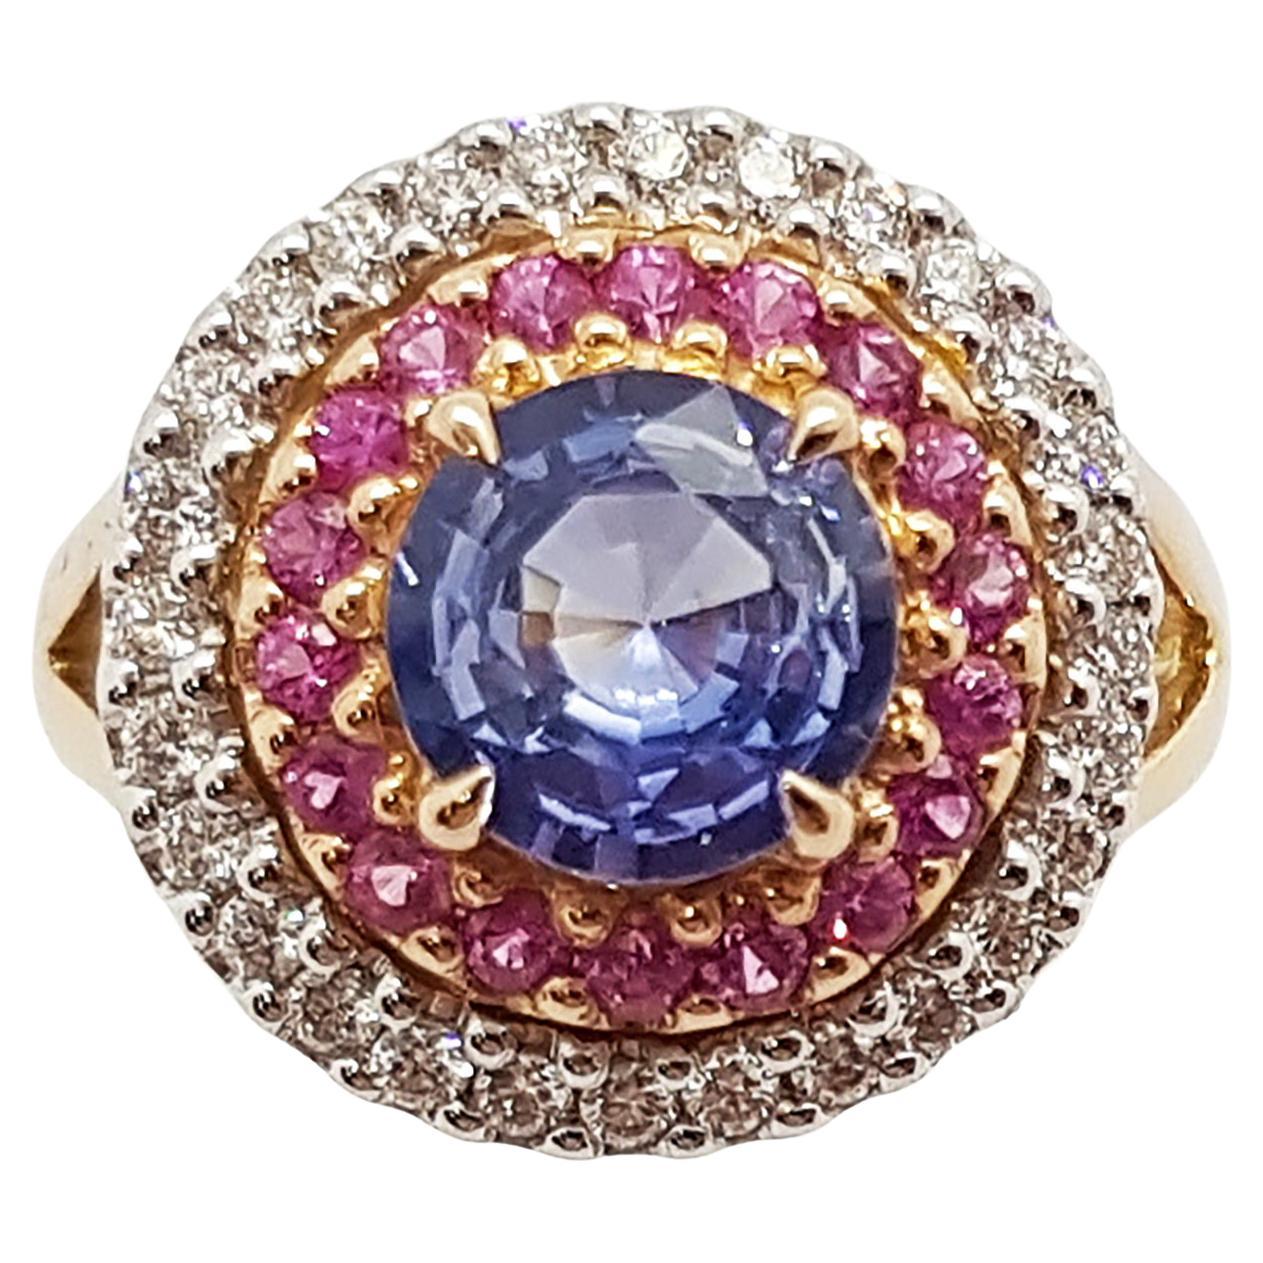 Blue Sapphire with Pink Sapphire and Diamond Ring Set in 18 Karat Rose Gold